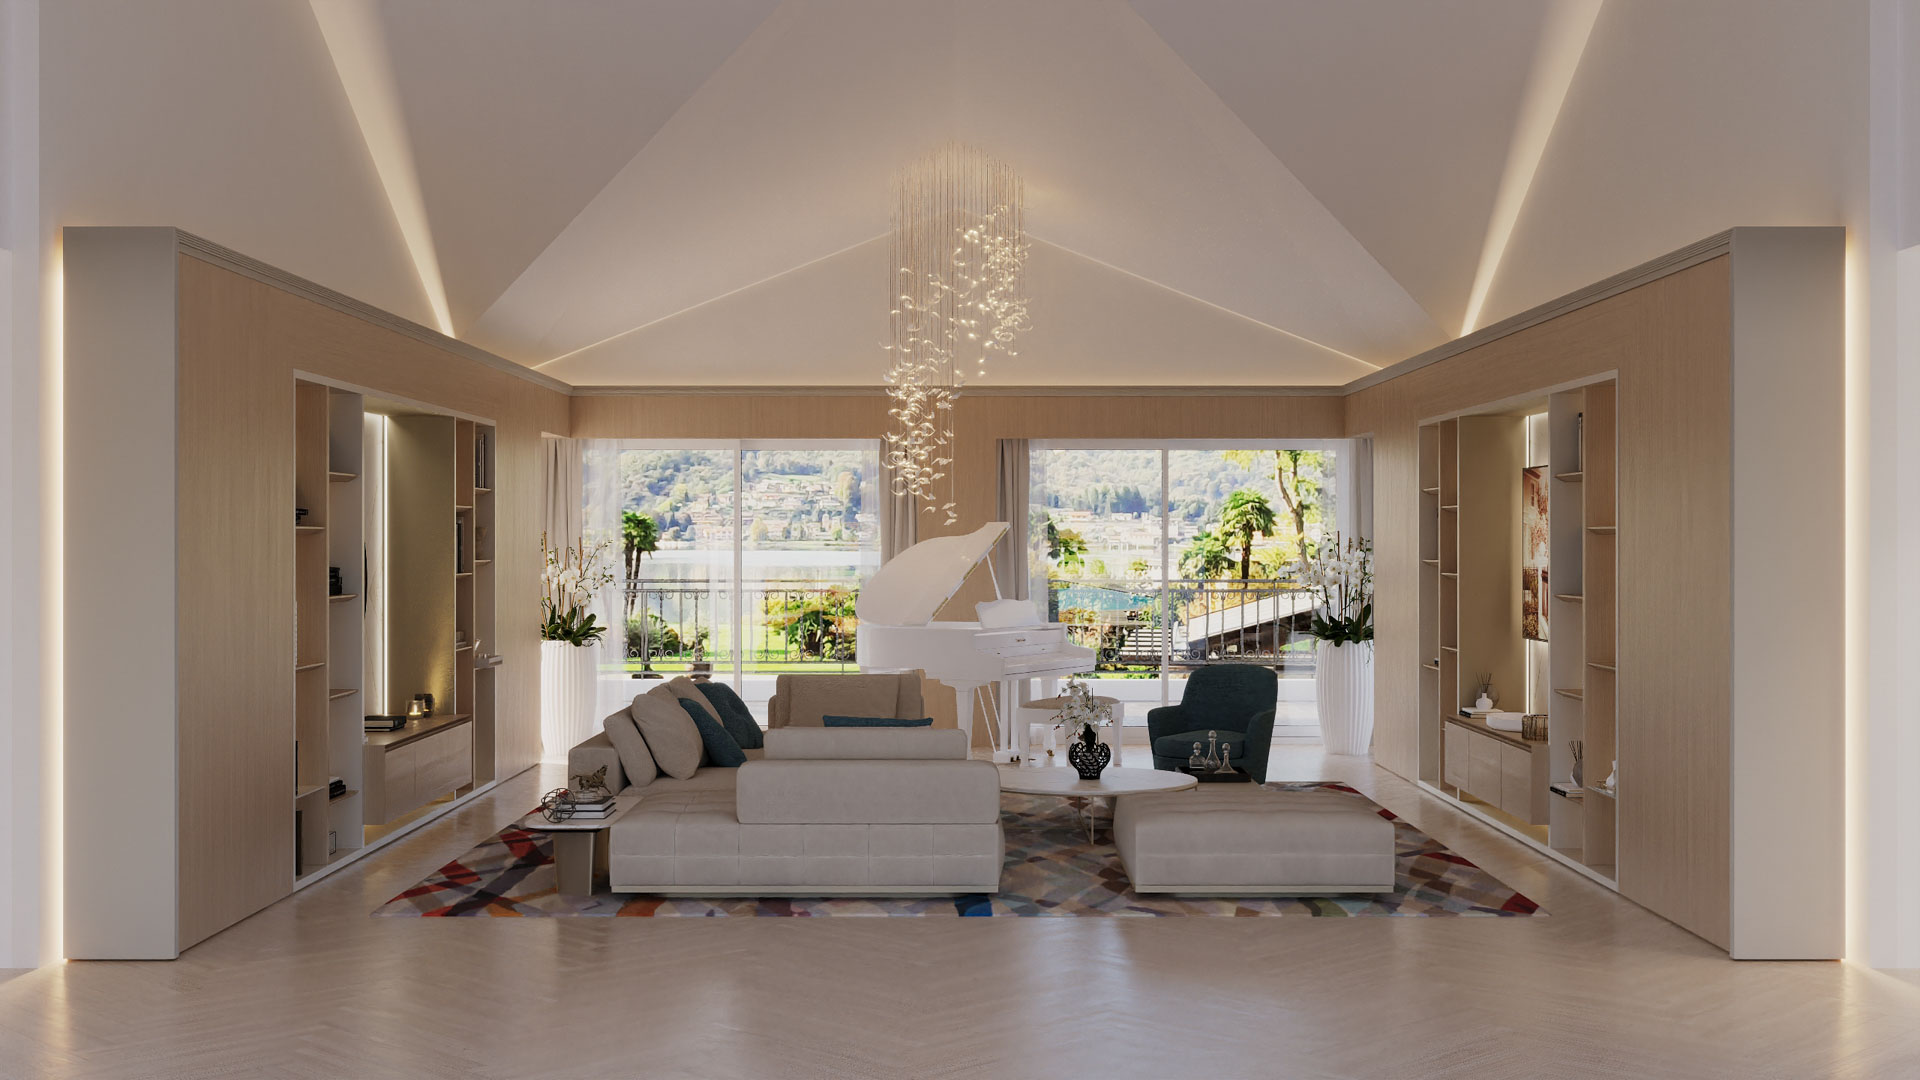 A bright, open-concept living space with a grand piano, cascading chandelier, and expansive windows showcasing a scenic view.